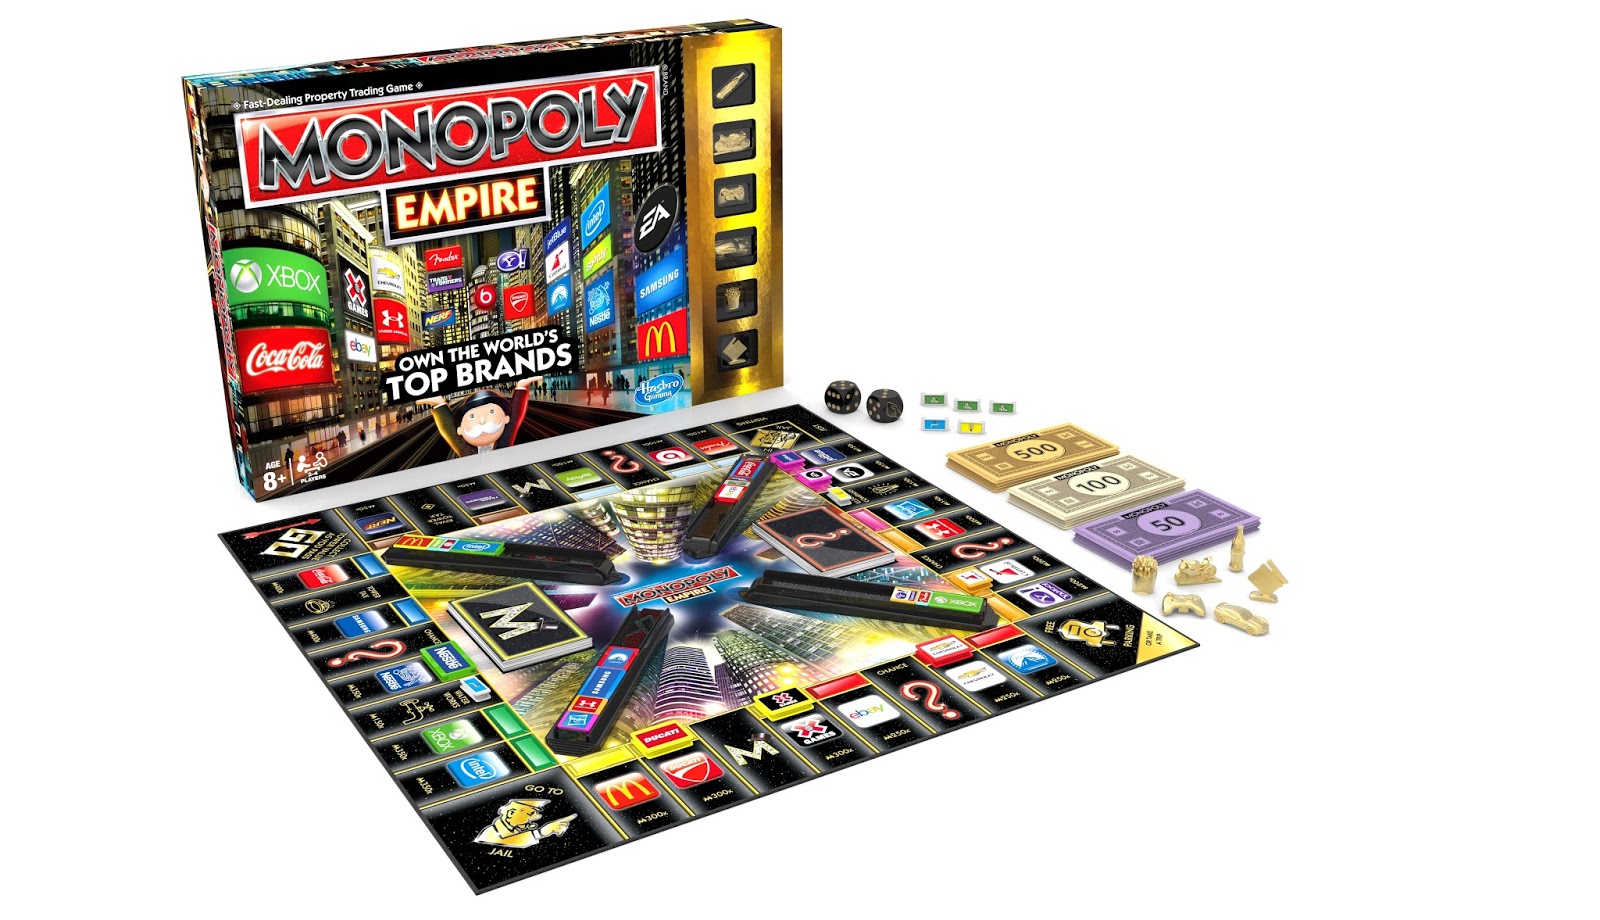 Full version of monopoly game